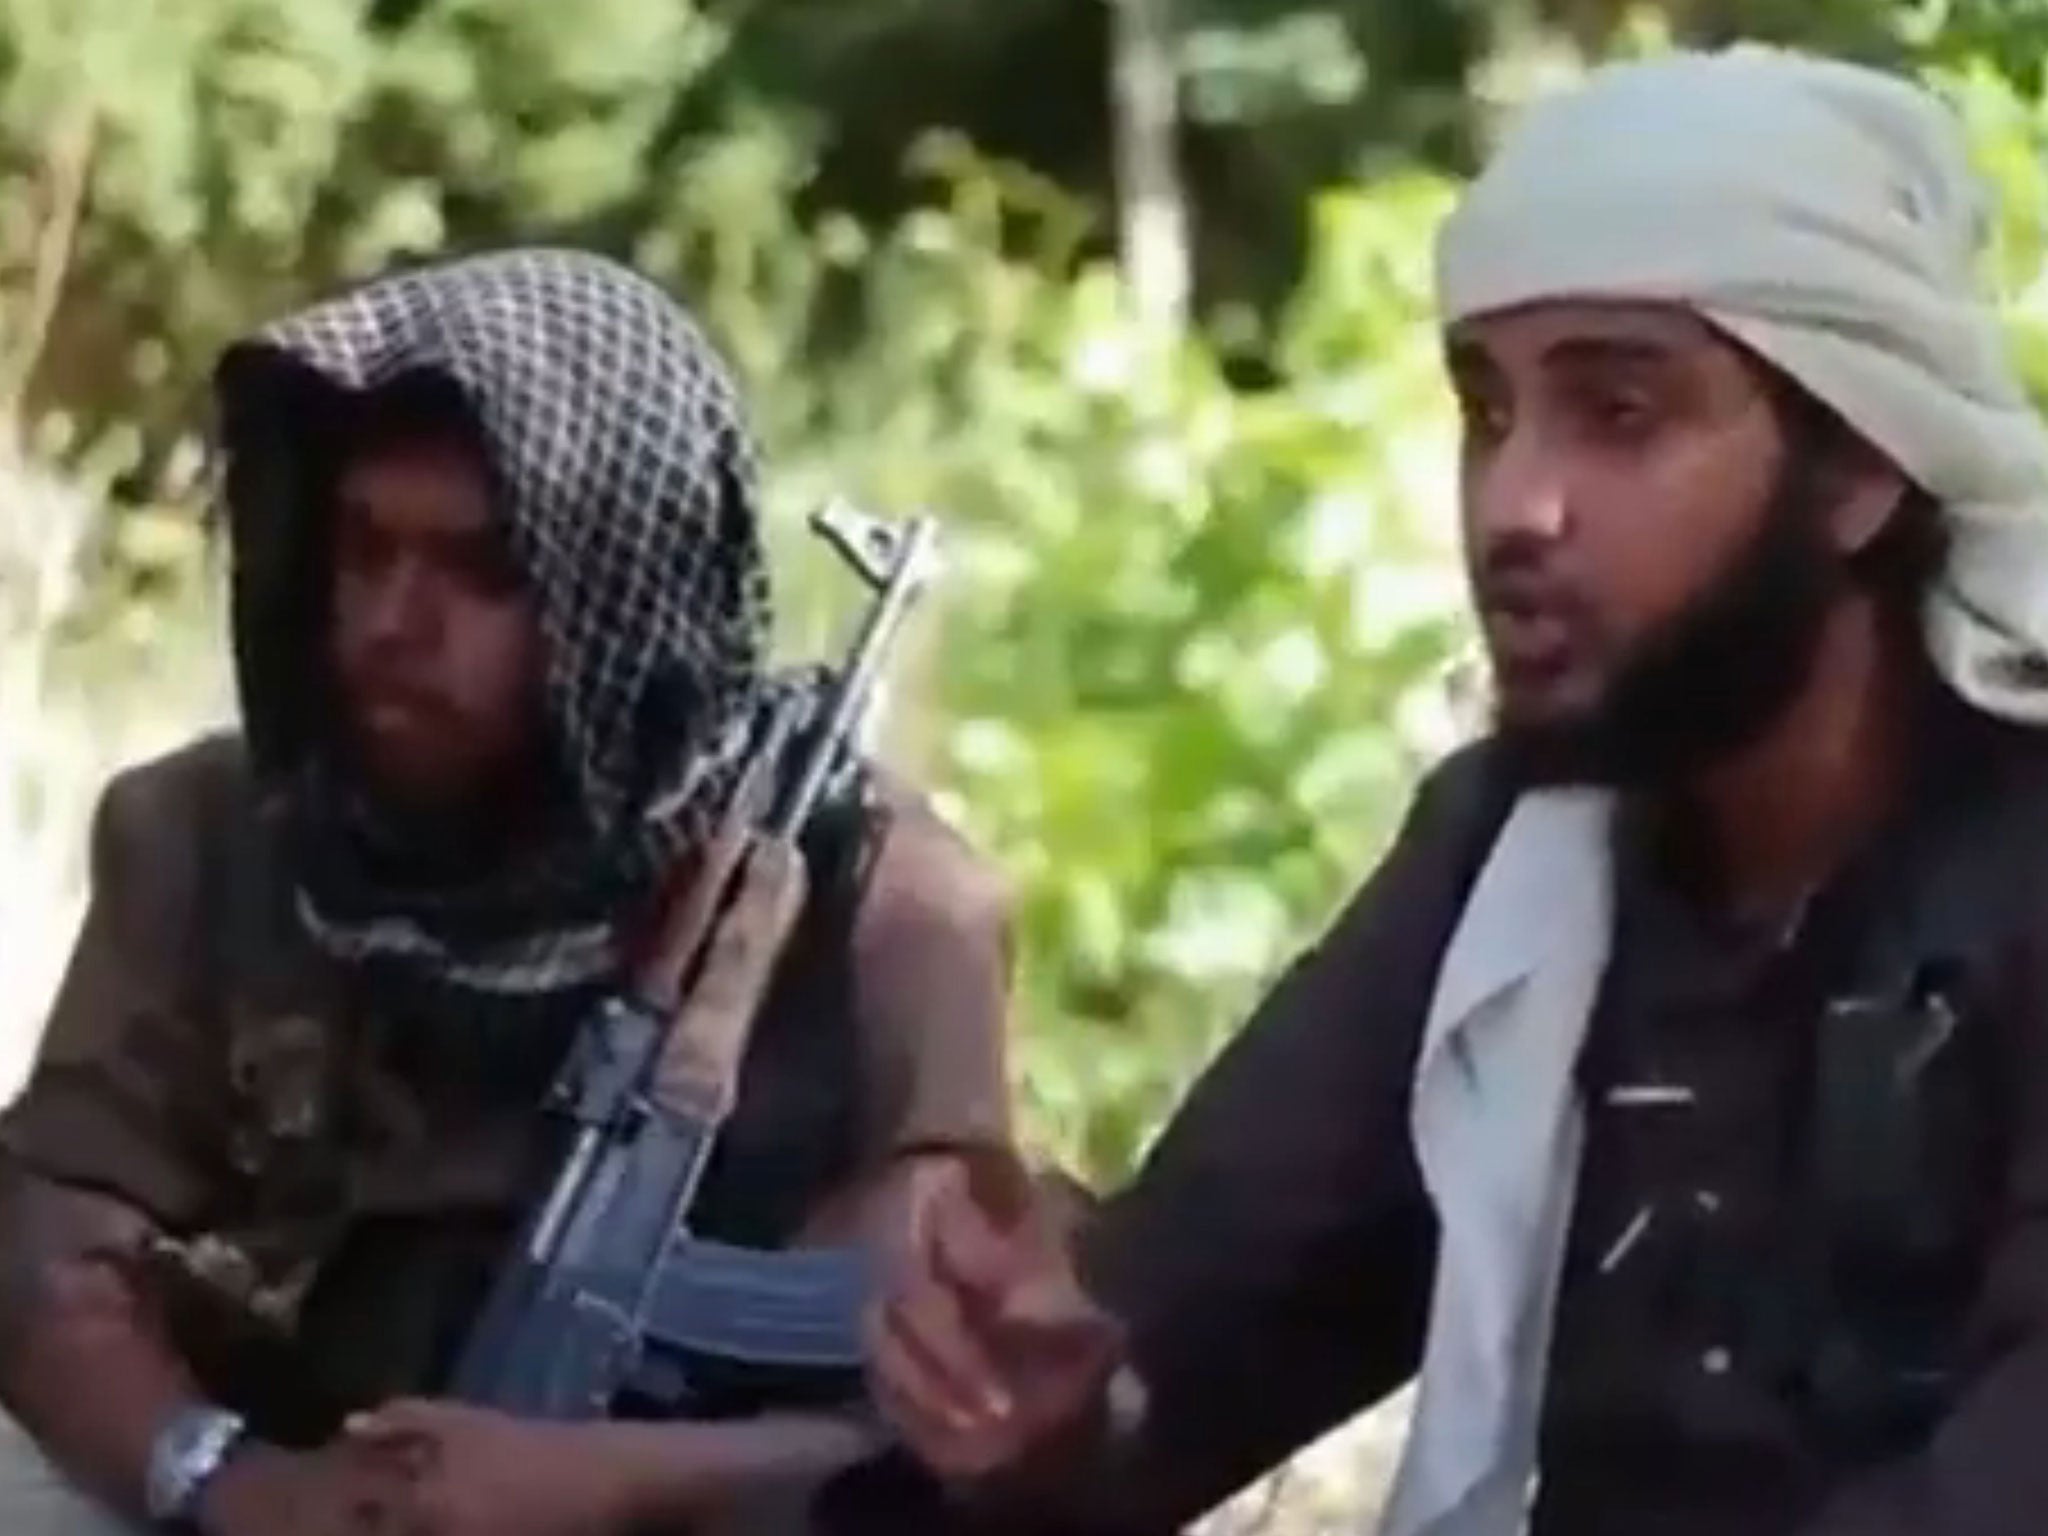 Screengrab taken from YouTube of a video showing Islamist fighters, who claim to be British, appearing in a recruitment video for the terrorist group Islamic State in Iraq and the Levant (Isis)